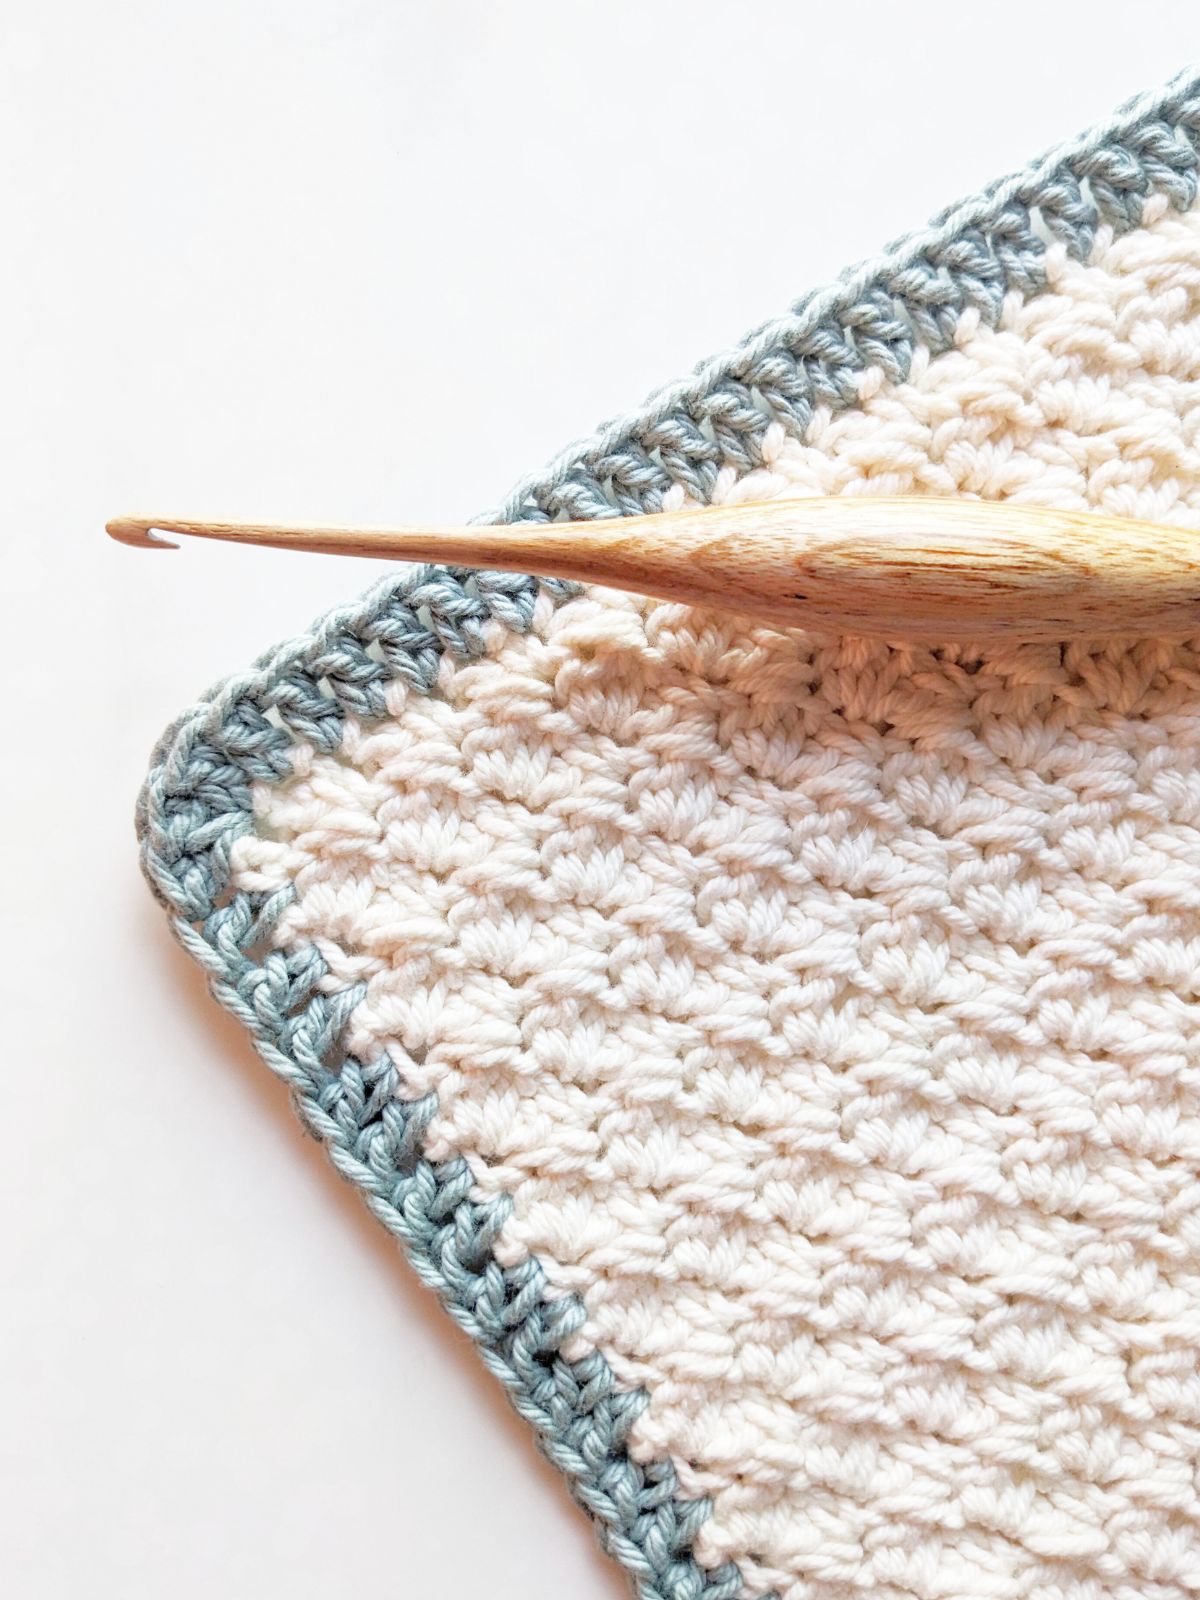 A crochet swatch with a double crochet border.